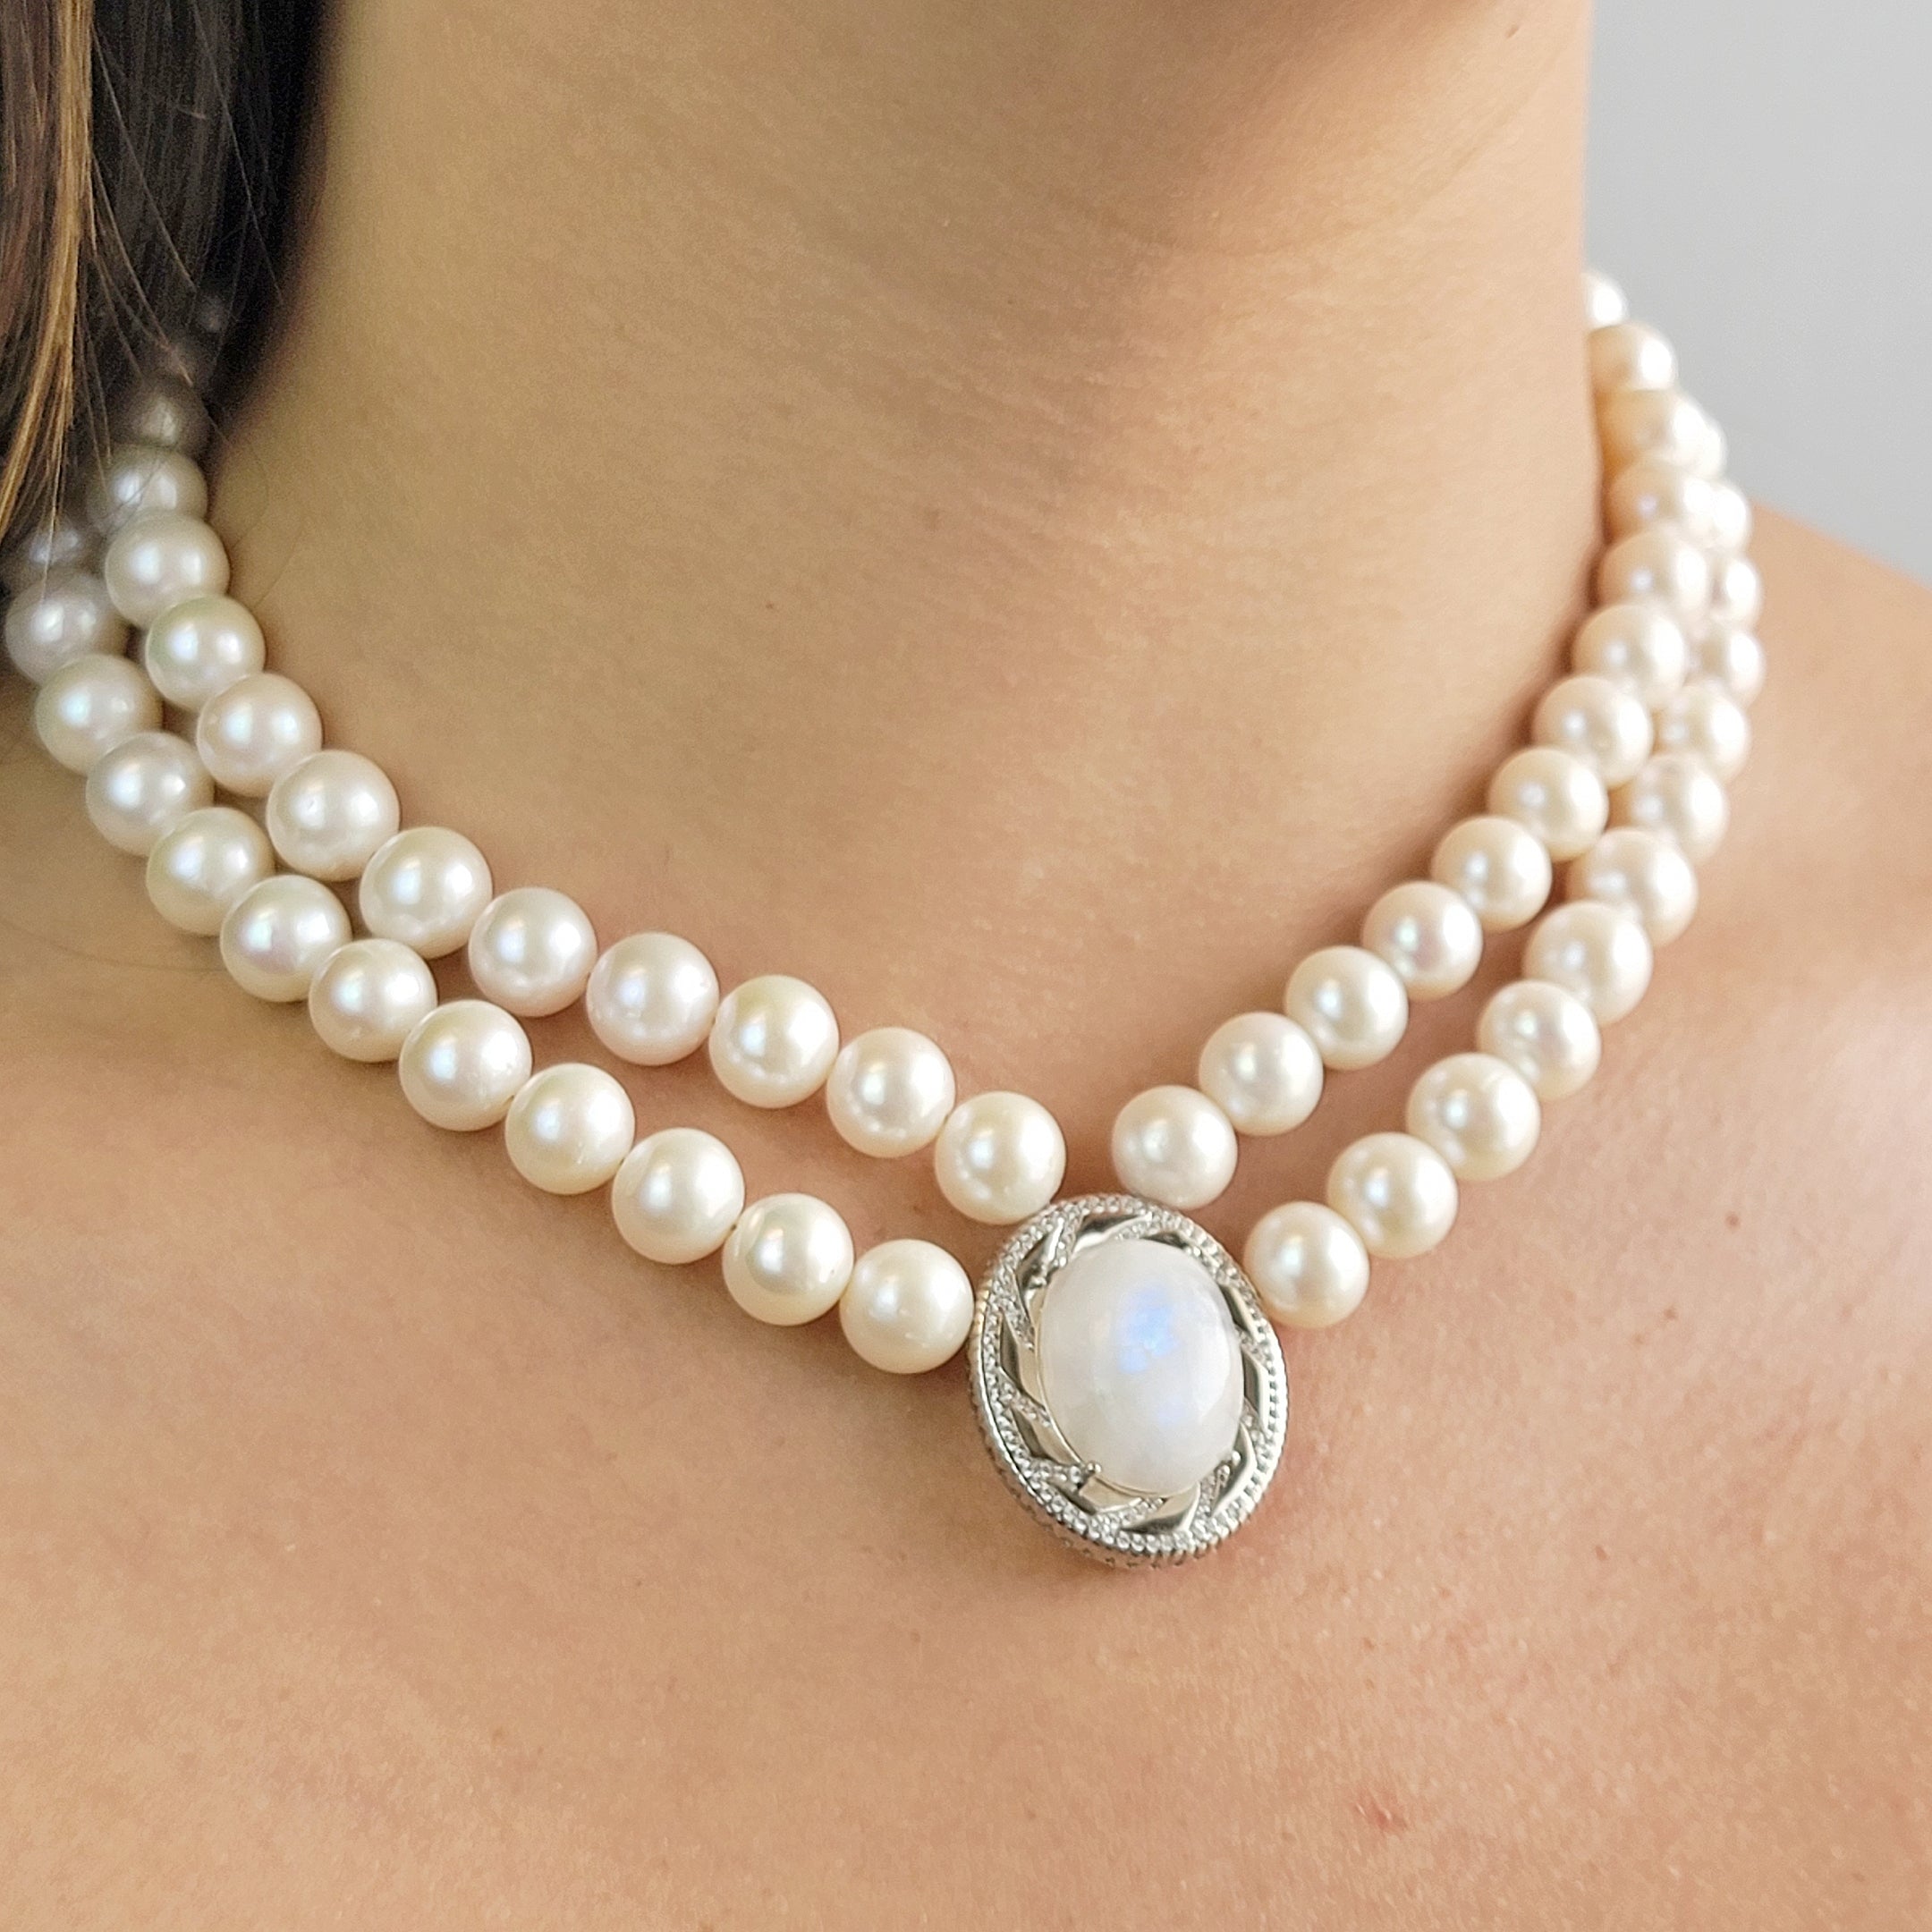 BAroque Pearl Necklace Bracelet EArring SET REAL Pearl Jewelry Hand SILK  strung